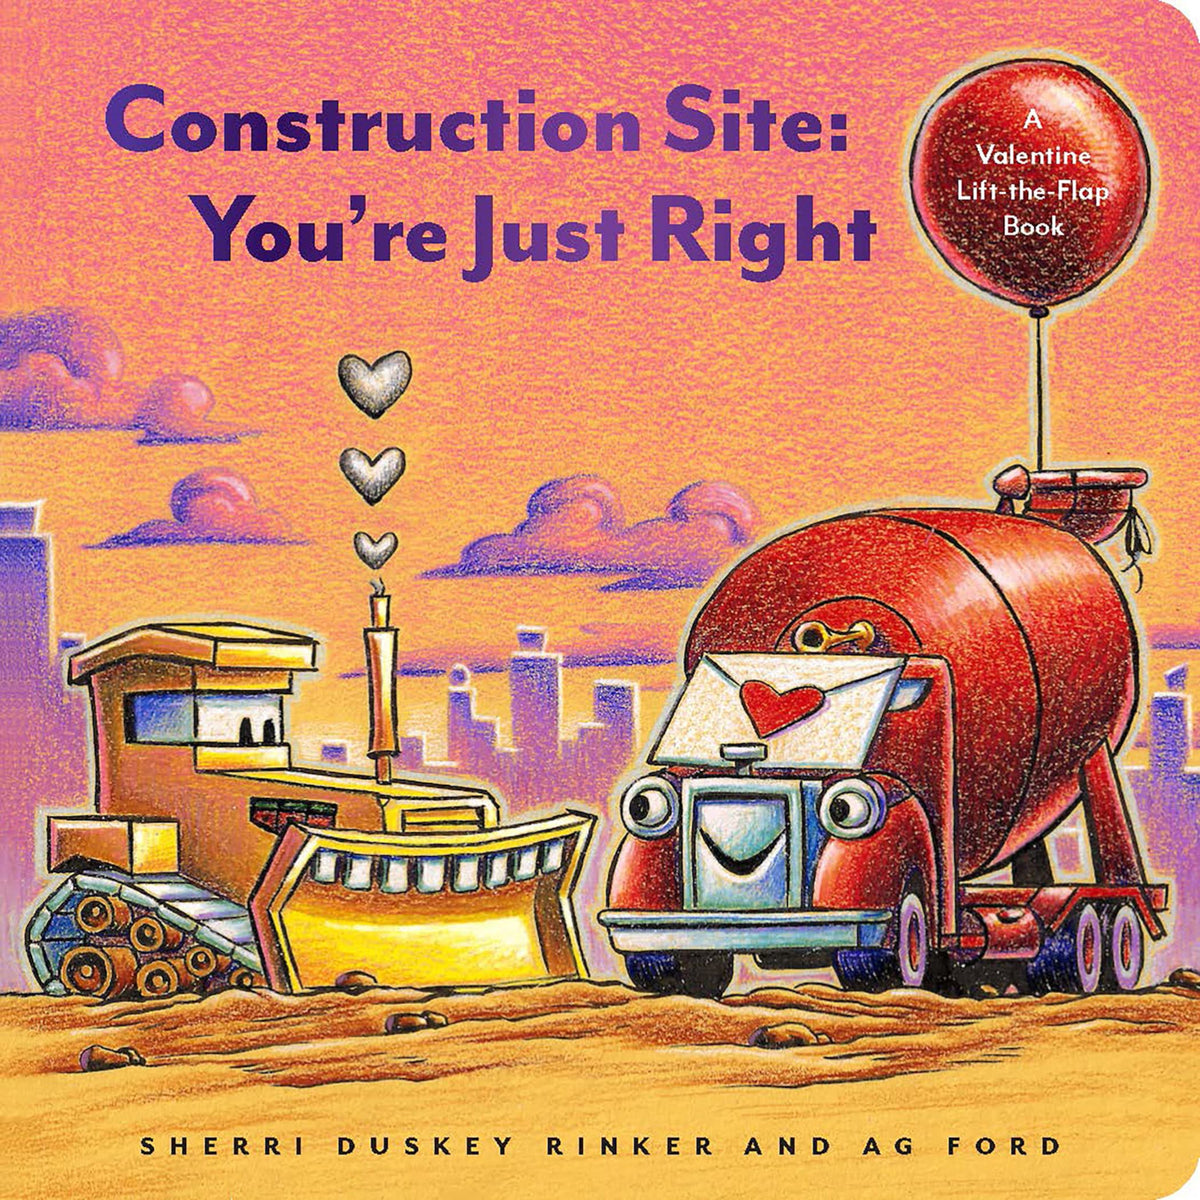 Construction Site: You're Just Right : A Valentine Lift-the-Flap Book